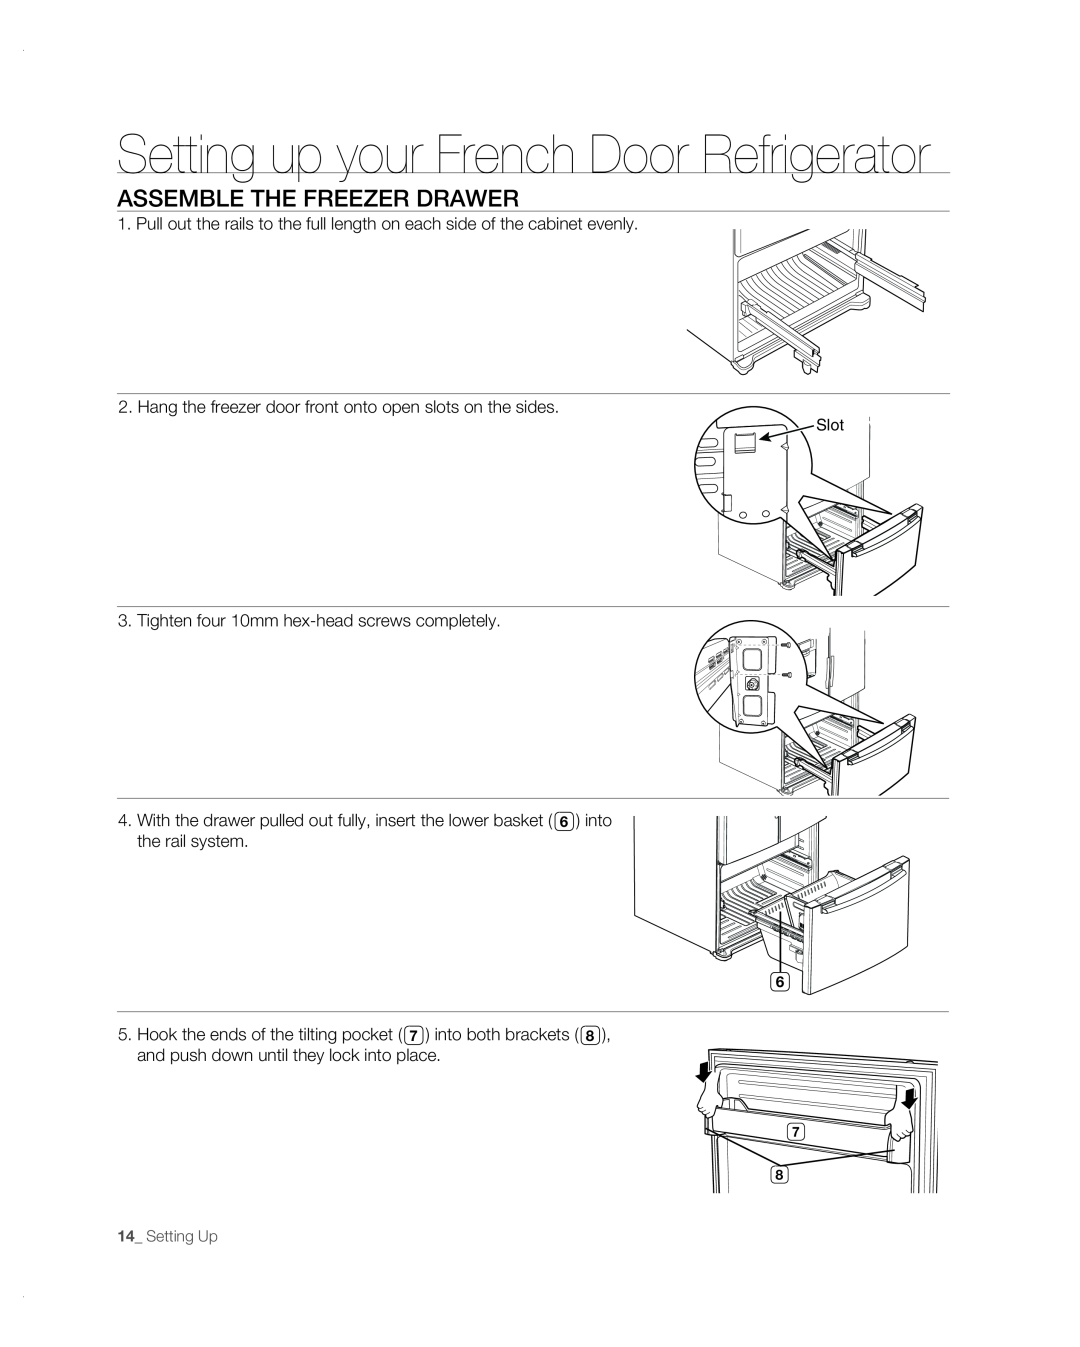 Samsung RF267AB user manual assemble the freezer drawer, Setting up your French Door Refrigerator 